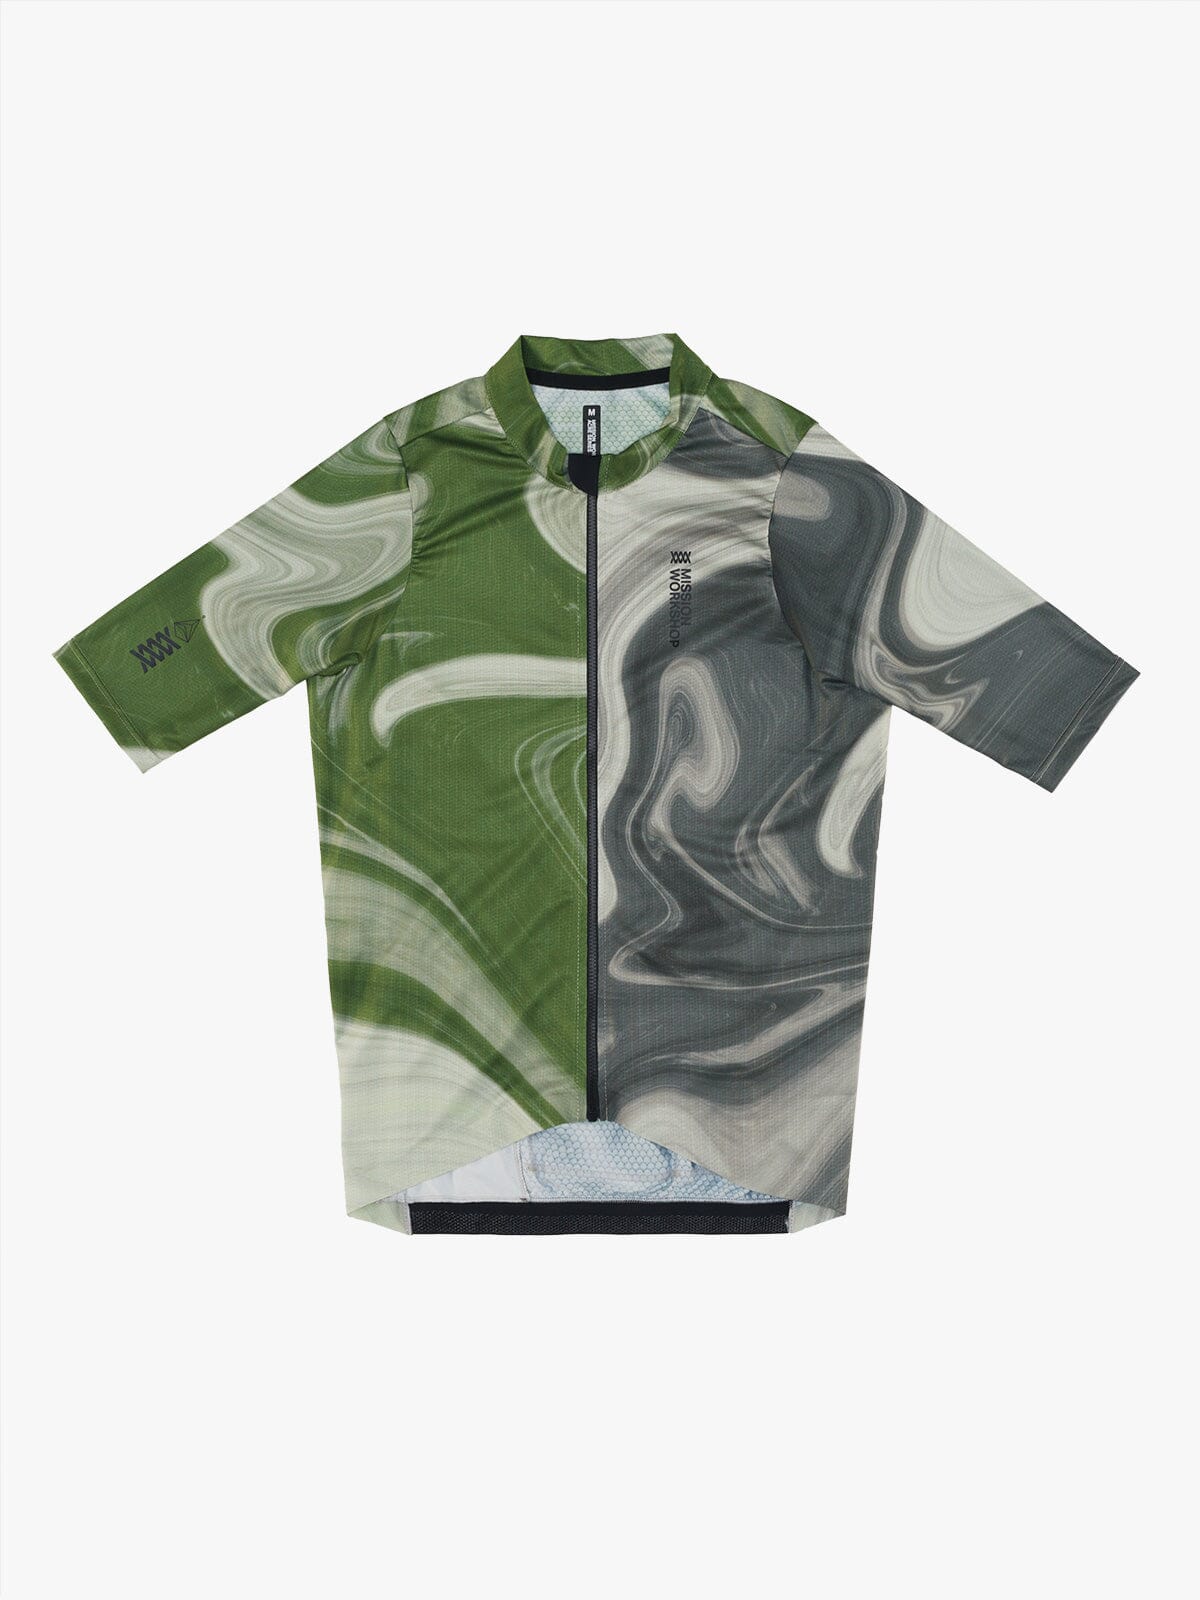 Camo style bike jersey, cycling shirt with camo print, unqiue camouflage  designs, colorful camo style jersey